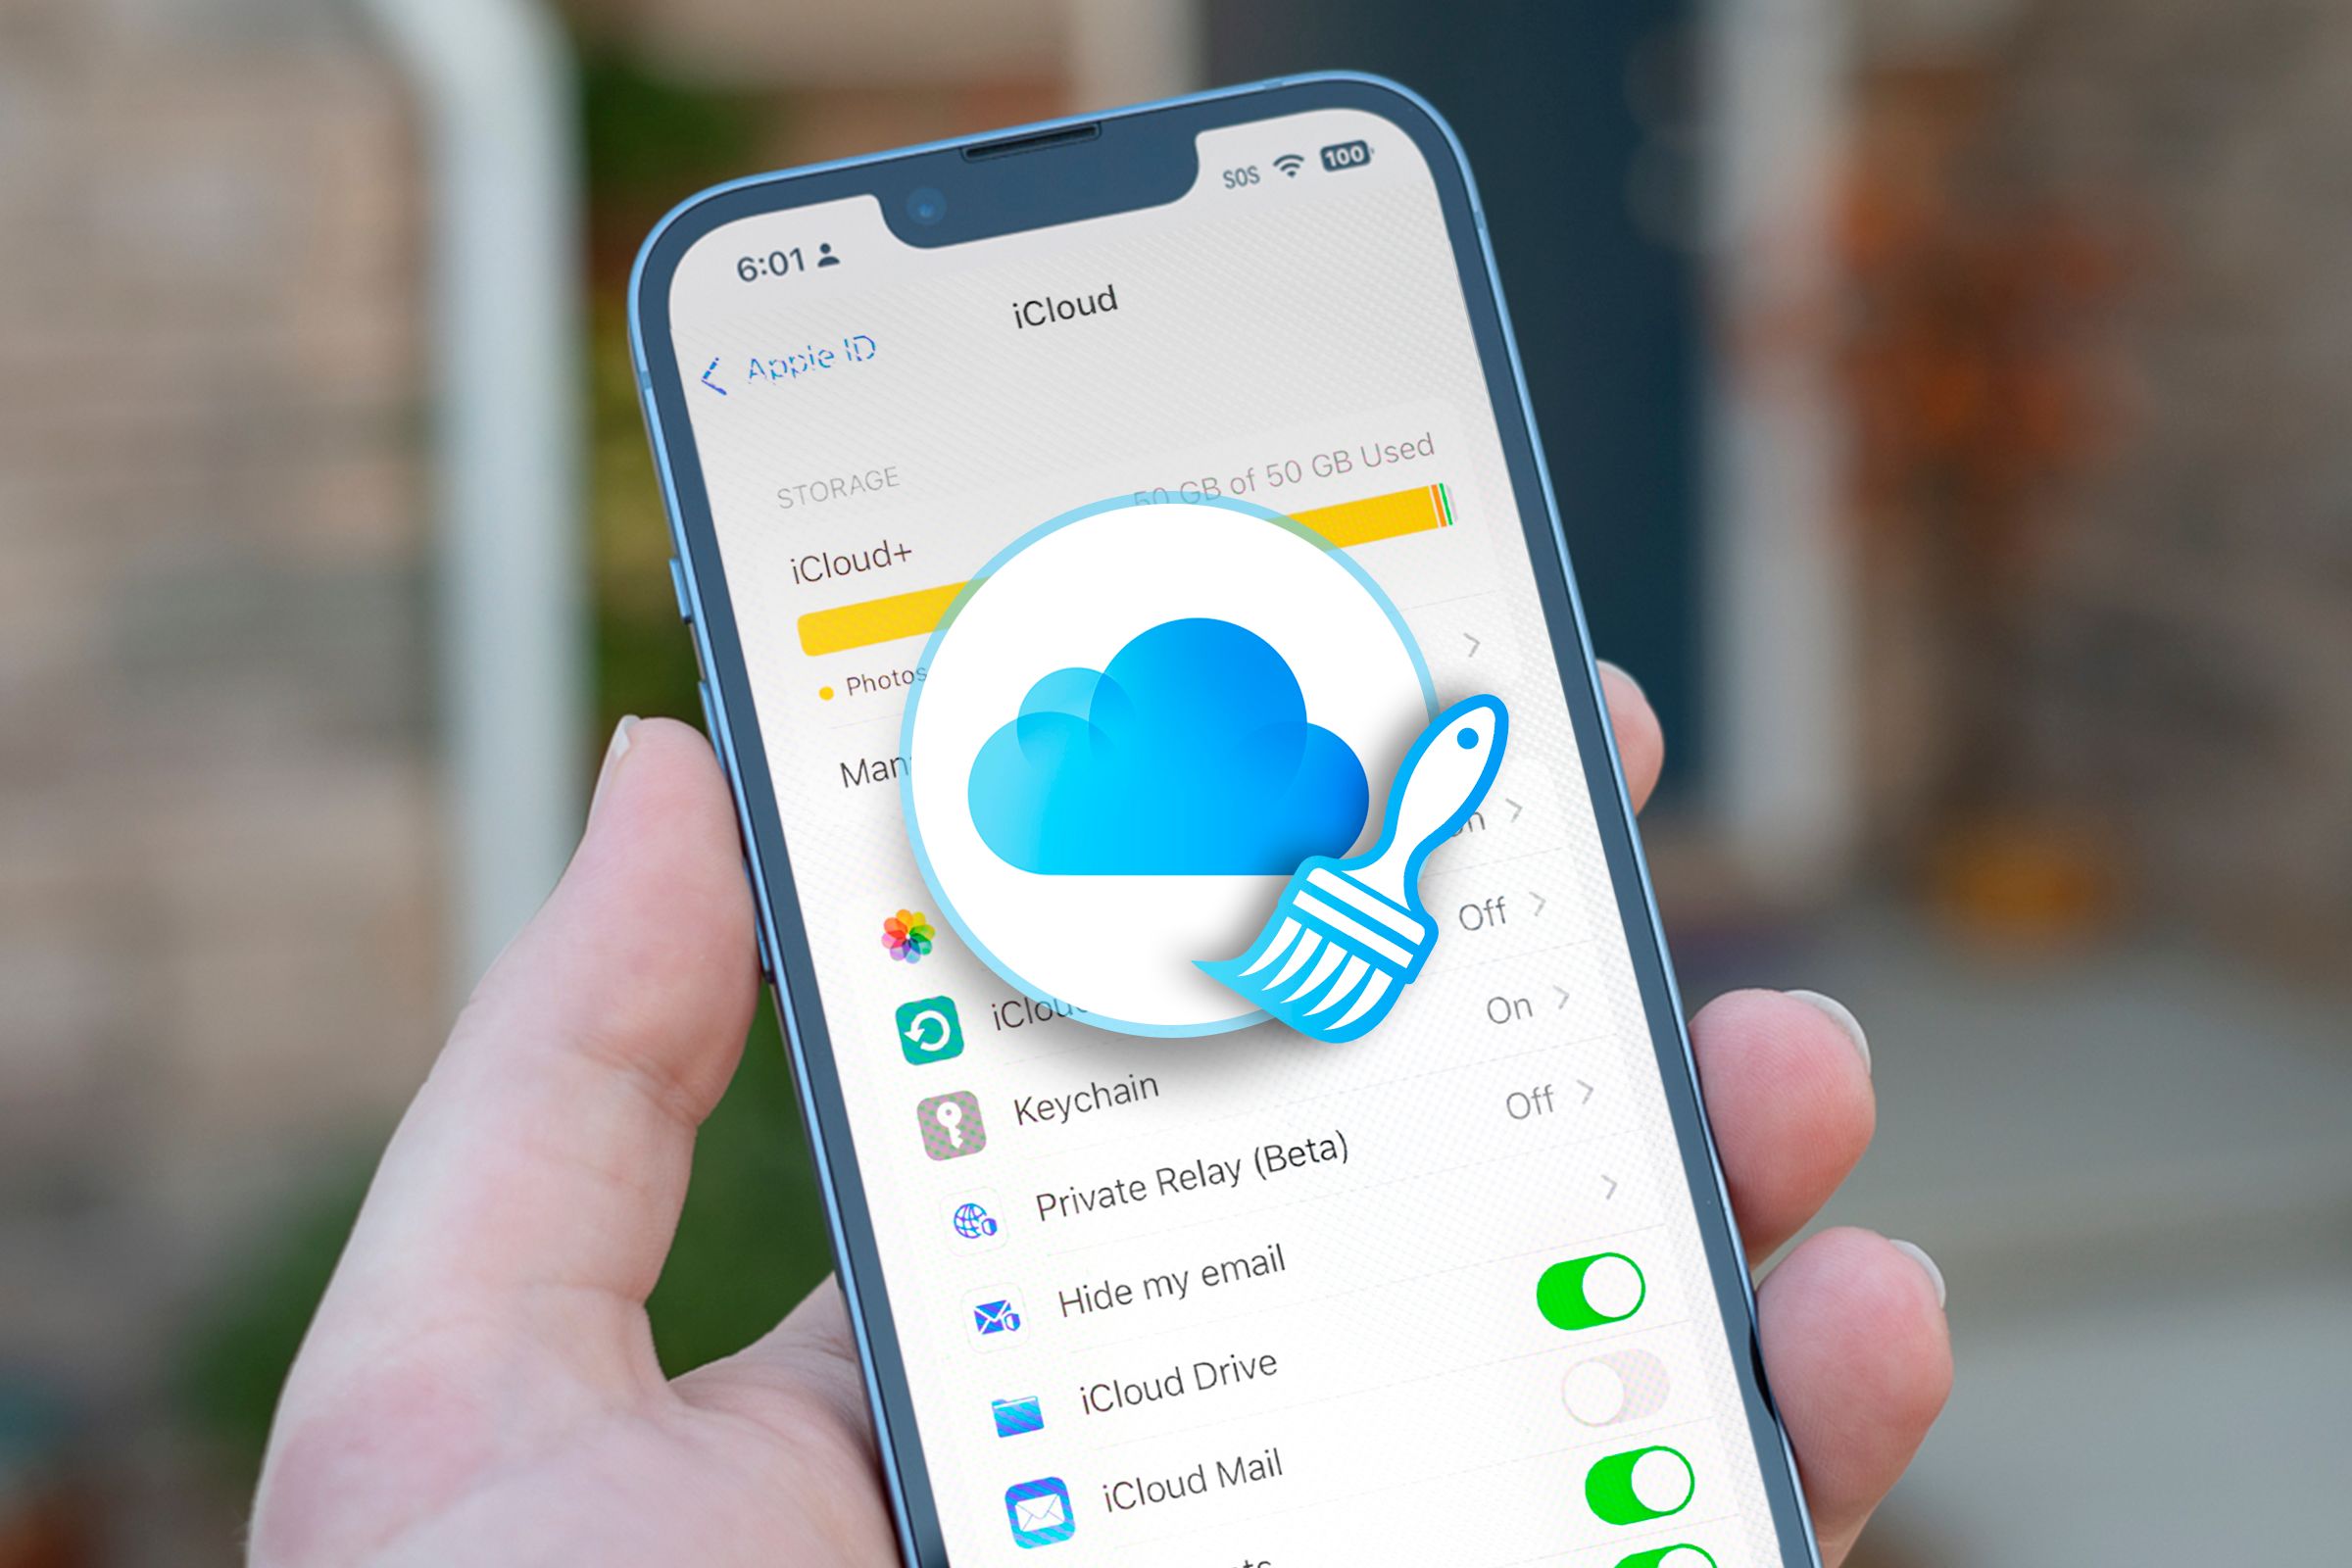 An iPhone on the iCloud storage screen with a cloud icon in the center and a cleaning icon.